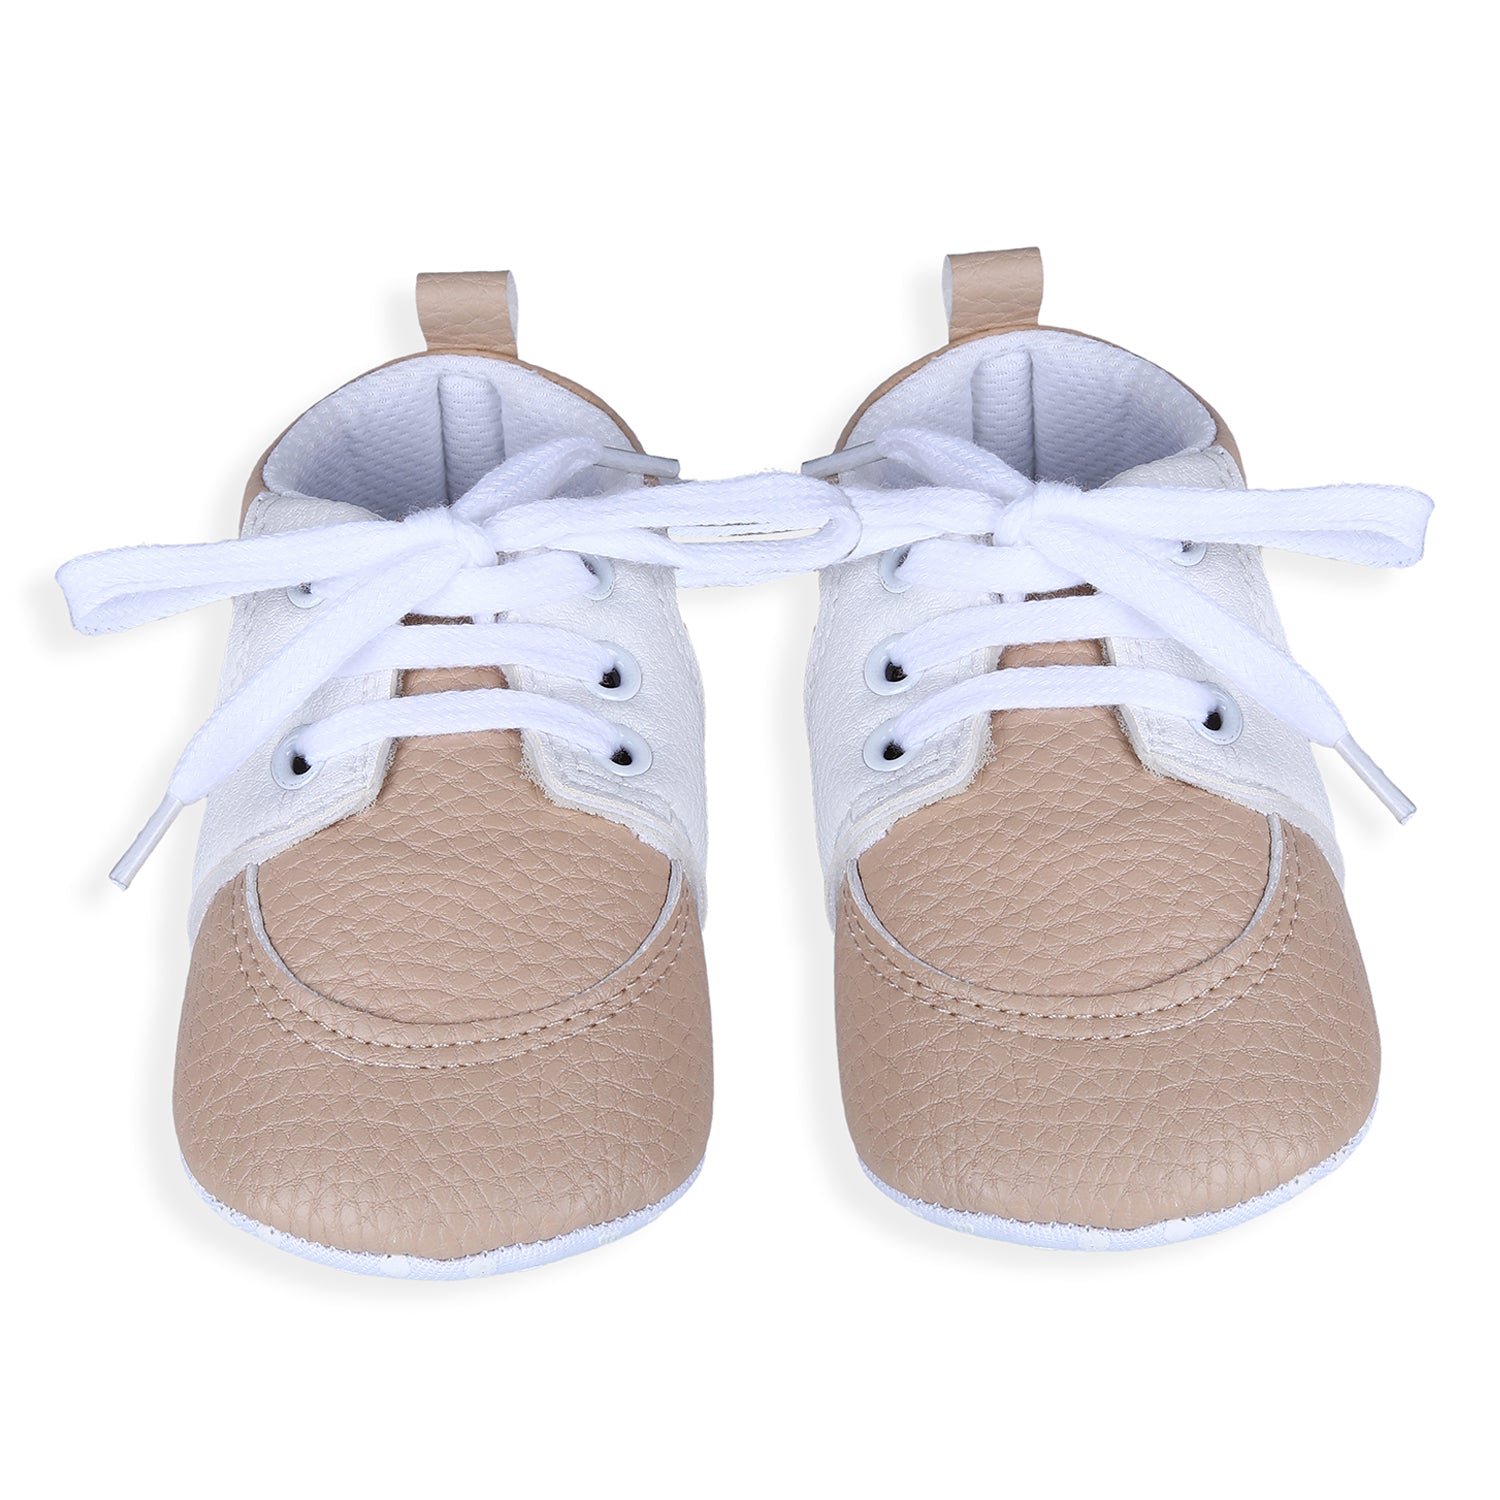 Lace-Up Stylish Leather Sneaker Shoes - Beige - Baby Moo